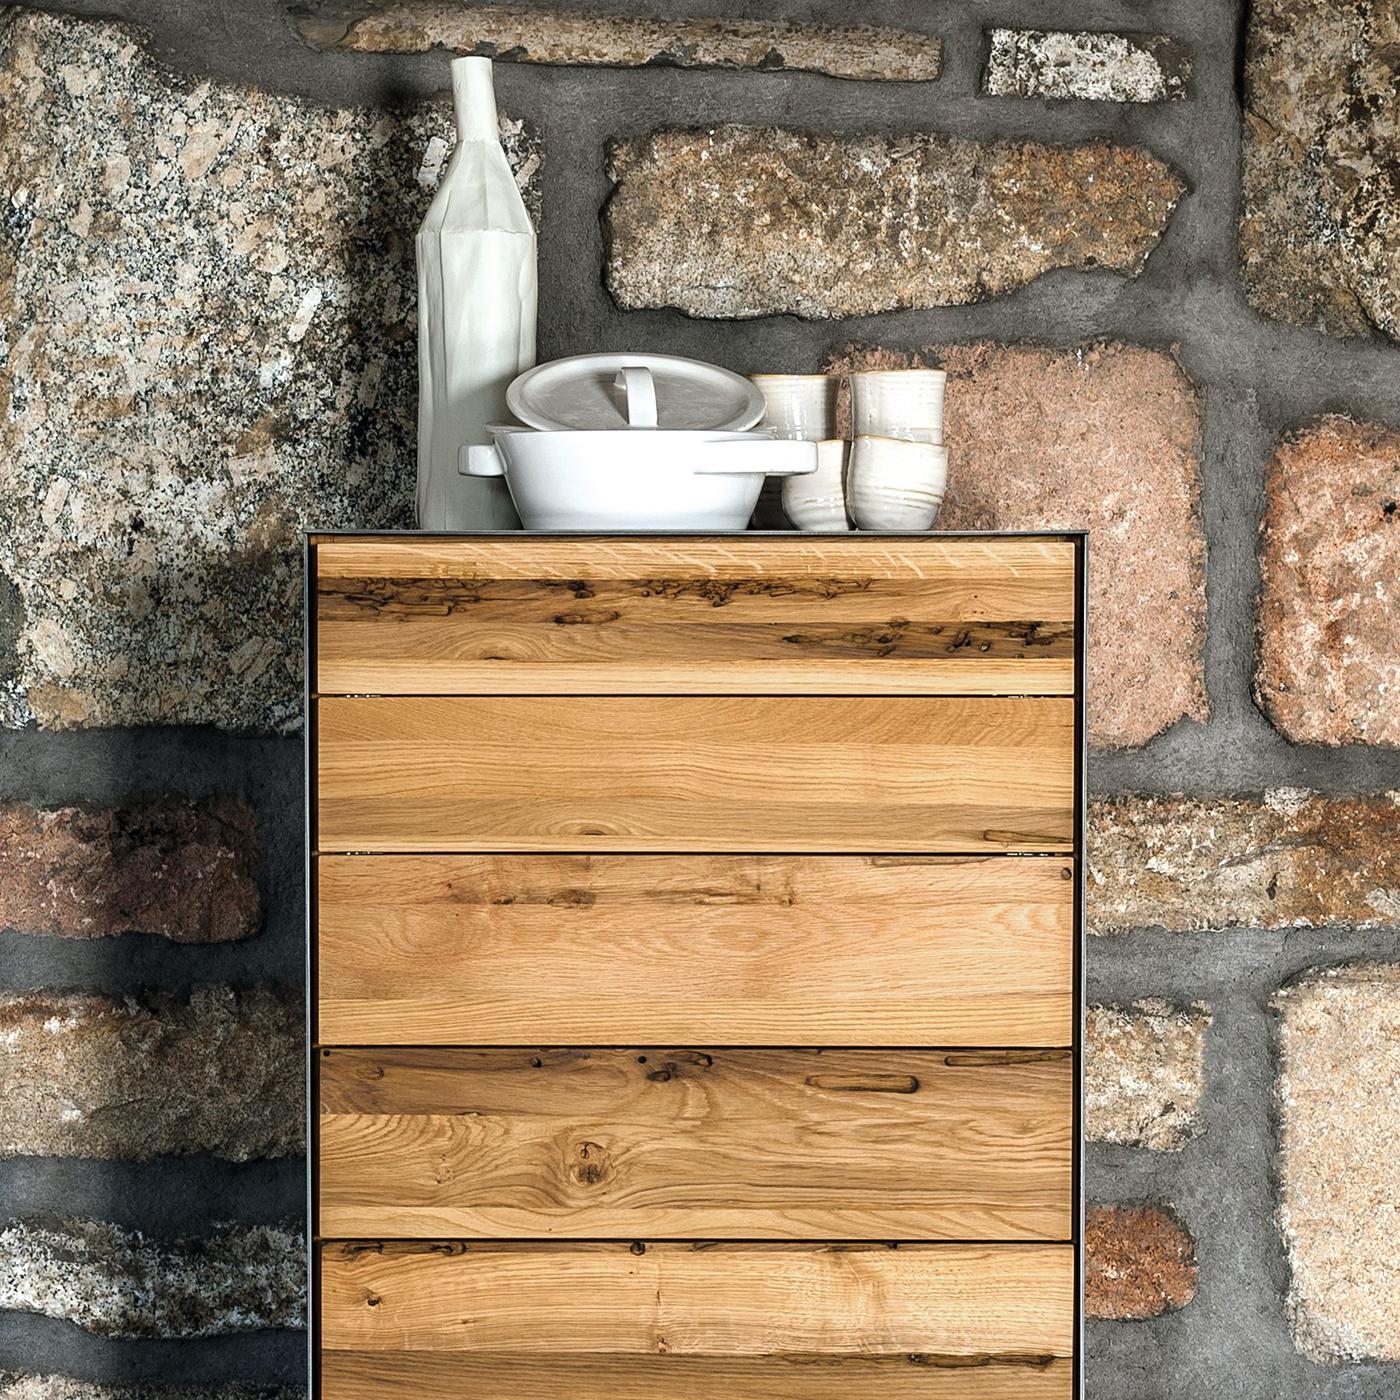 Chest of drawers trendy raw oak with 7 drawers in solid raw oak wood,
drawers with easy glide system on metal runners. Chest top, sides and 
base in lacquered iron. Chest back in oak wood.
Also available with dawers in solid walnut wood on